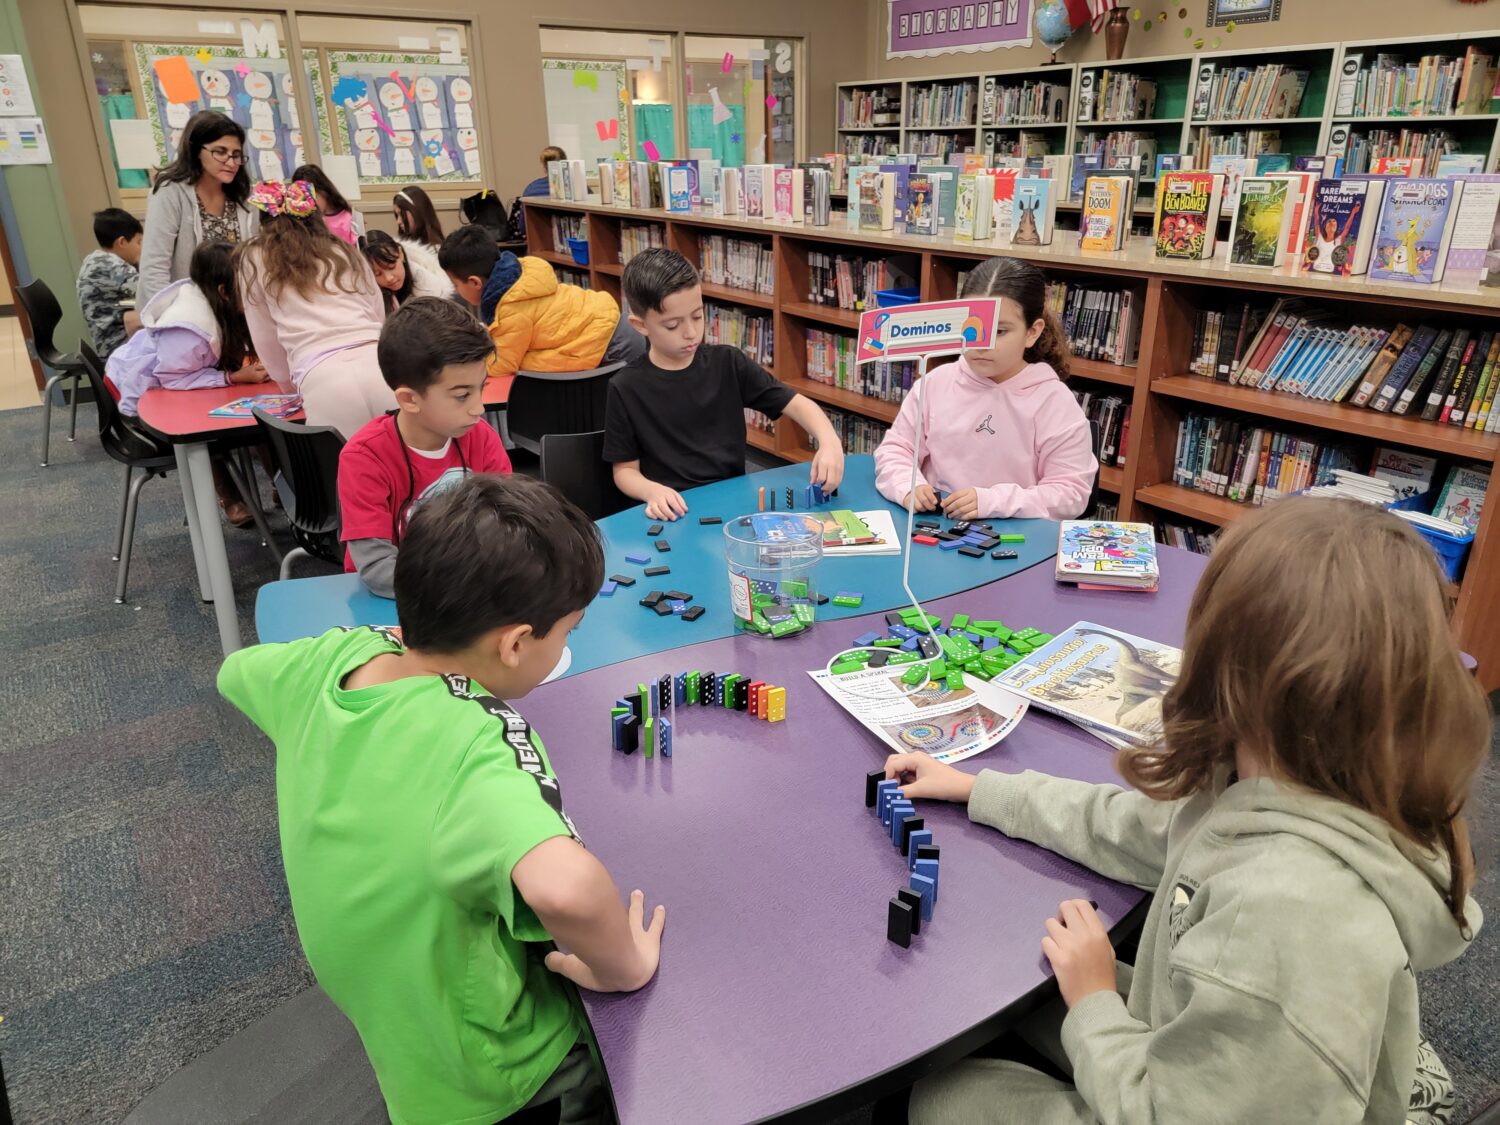 Students lining up colorful dominoes on a table in the library.